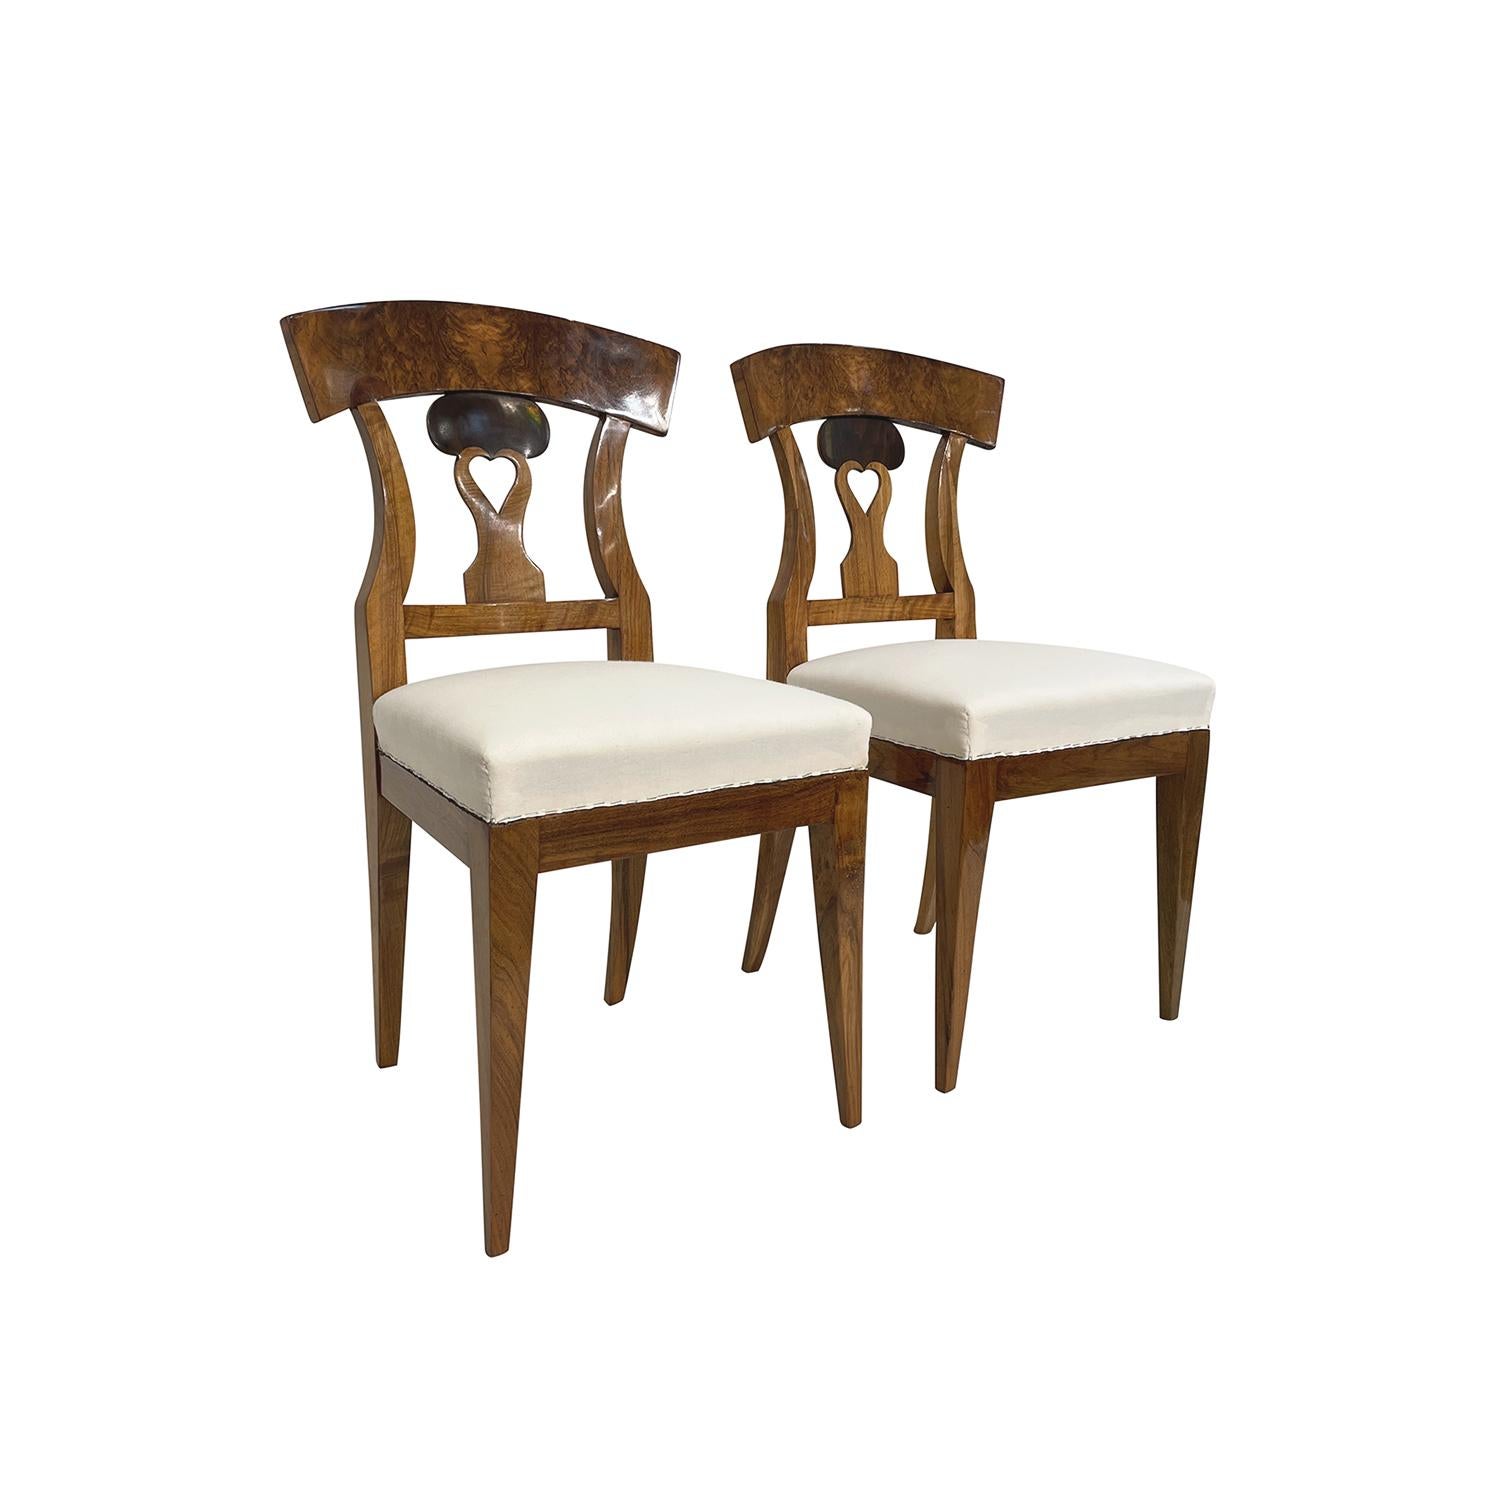 Hand-Carved 19th Century German Biedermeier Set of Four Cherrywood Dining Room Chairs